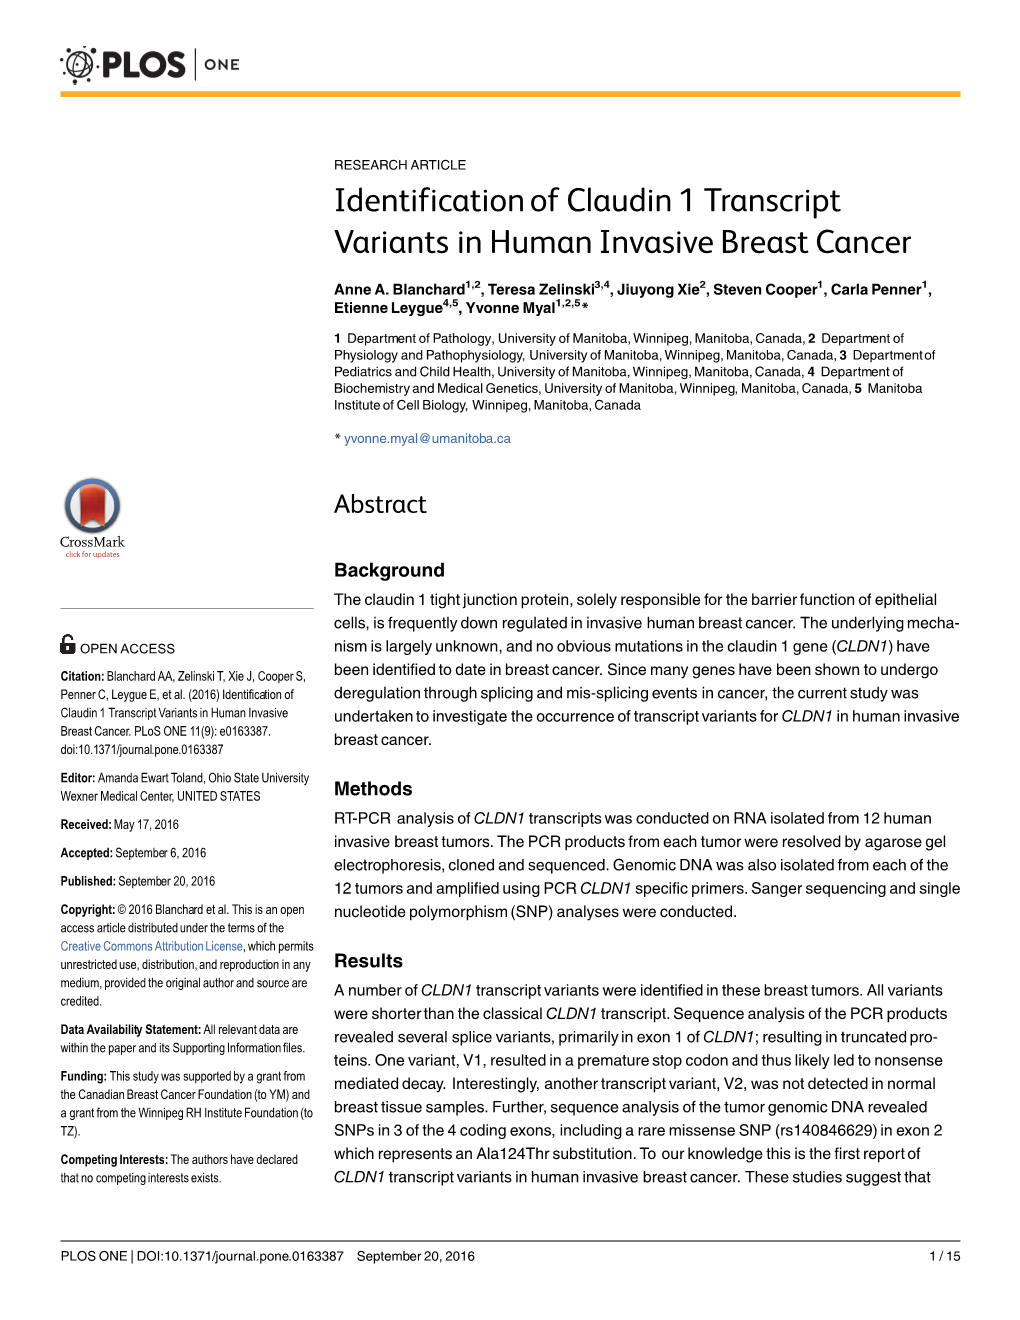 Identification of Claudin 1 Transcript Variants in Human Invasive Breast Cancer